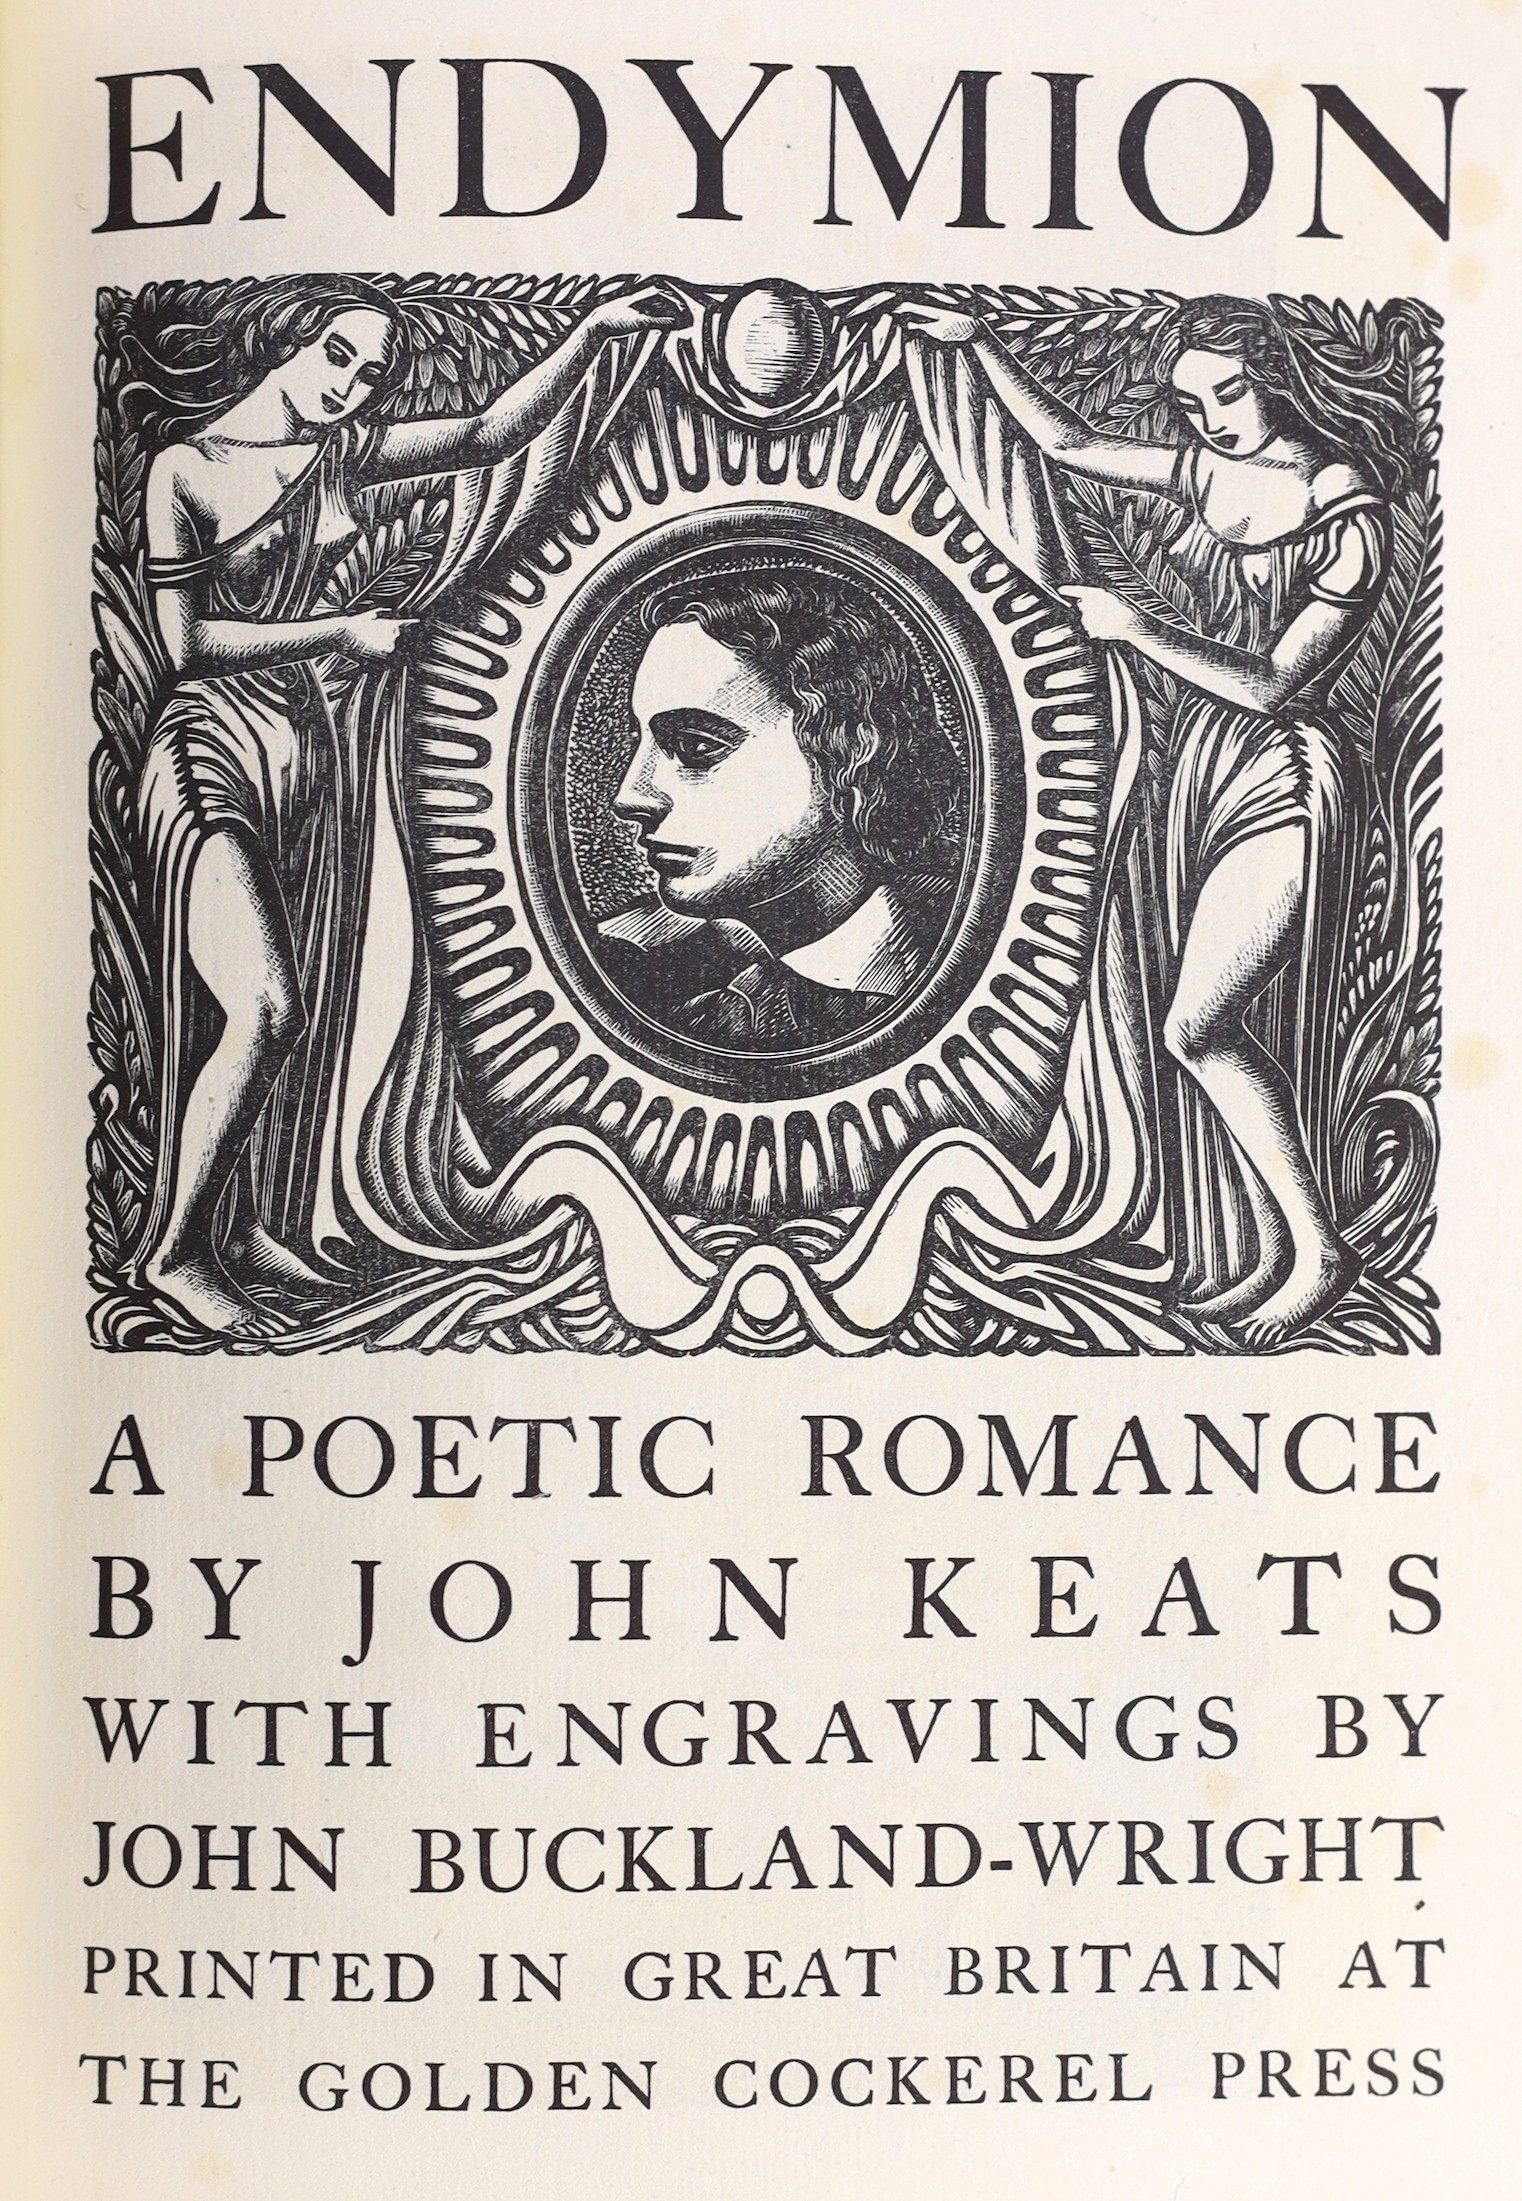 Golden Cockerel Press - Keats, John - Endymion. A Poetic Romance, one of 500, illustrated by John Buckland-Wright, 4to, quarter vellum and brown buckram by Sangorski and Sutcliffe, Waltham Saint Lawrence, 1947